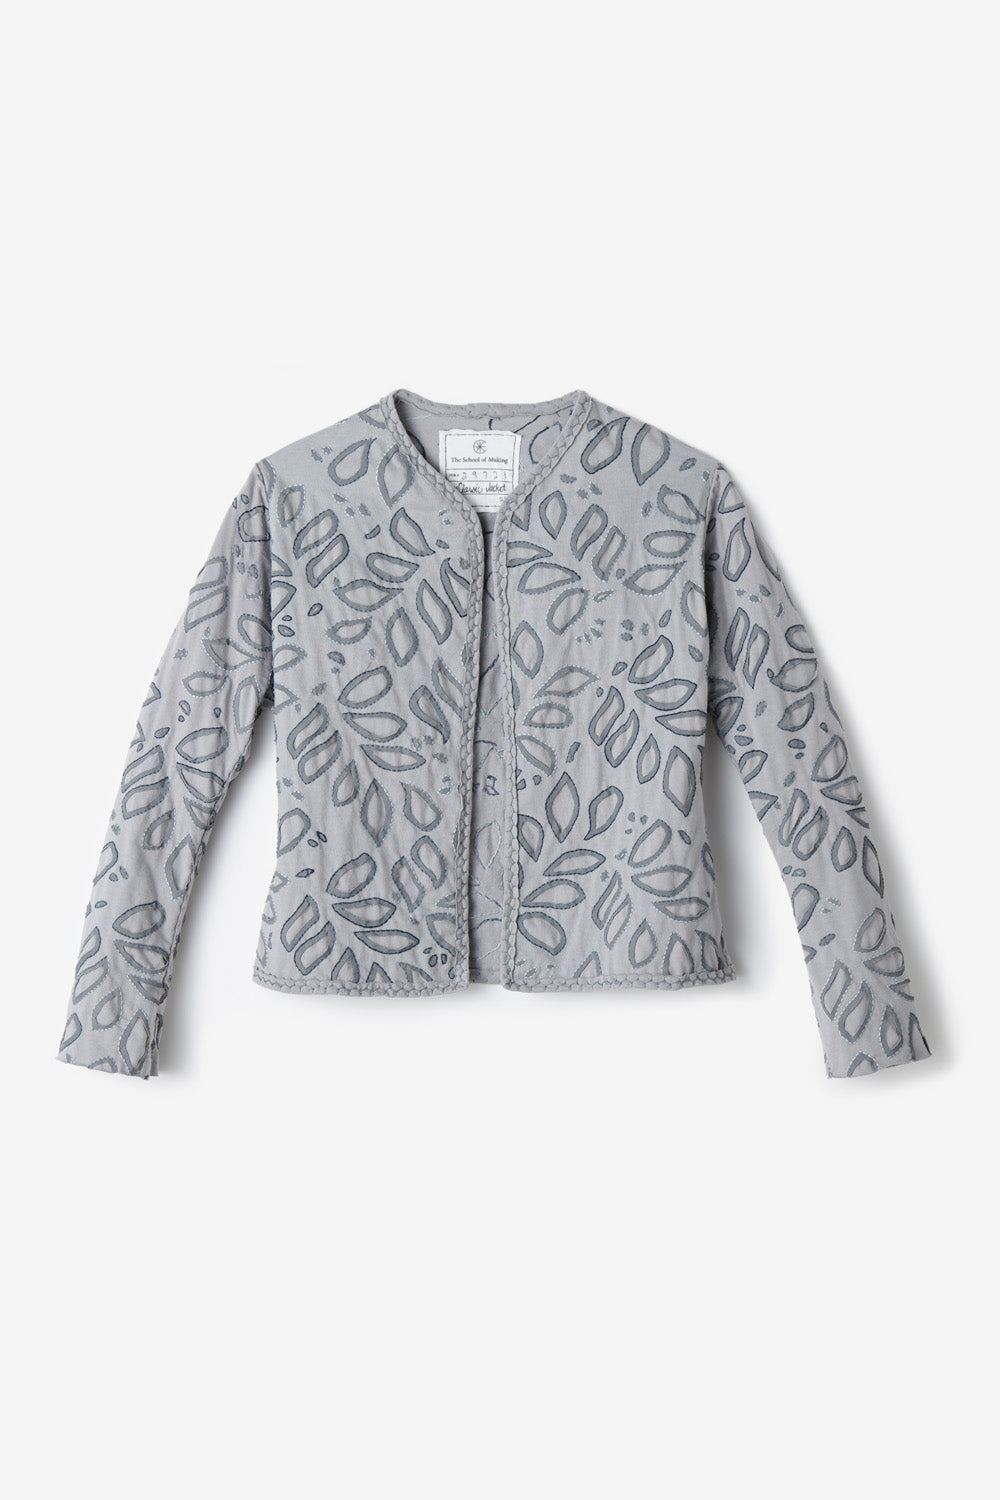 The School of Making Classic Jacket Organic Cotton Women's Jacket with Long Sleeves and Botanic Stencil